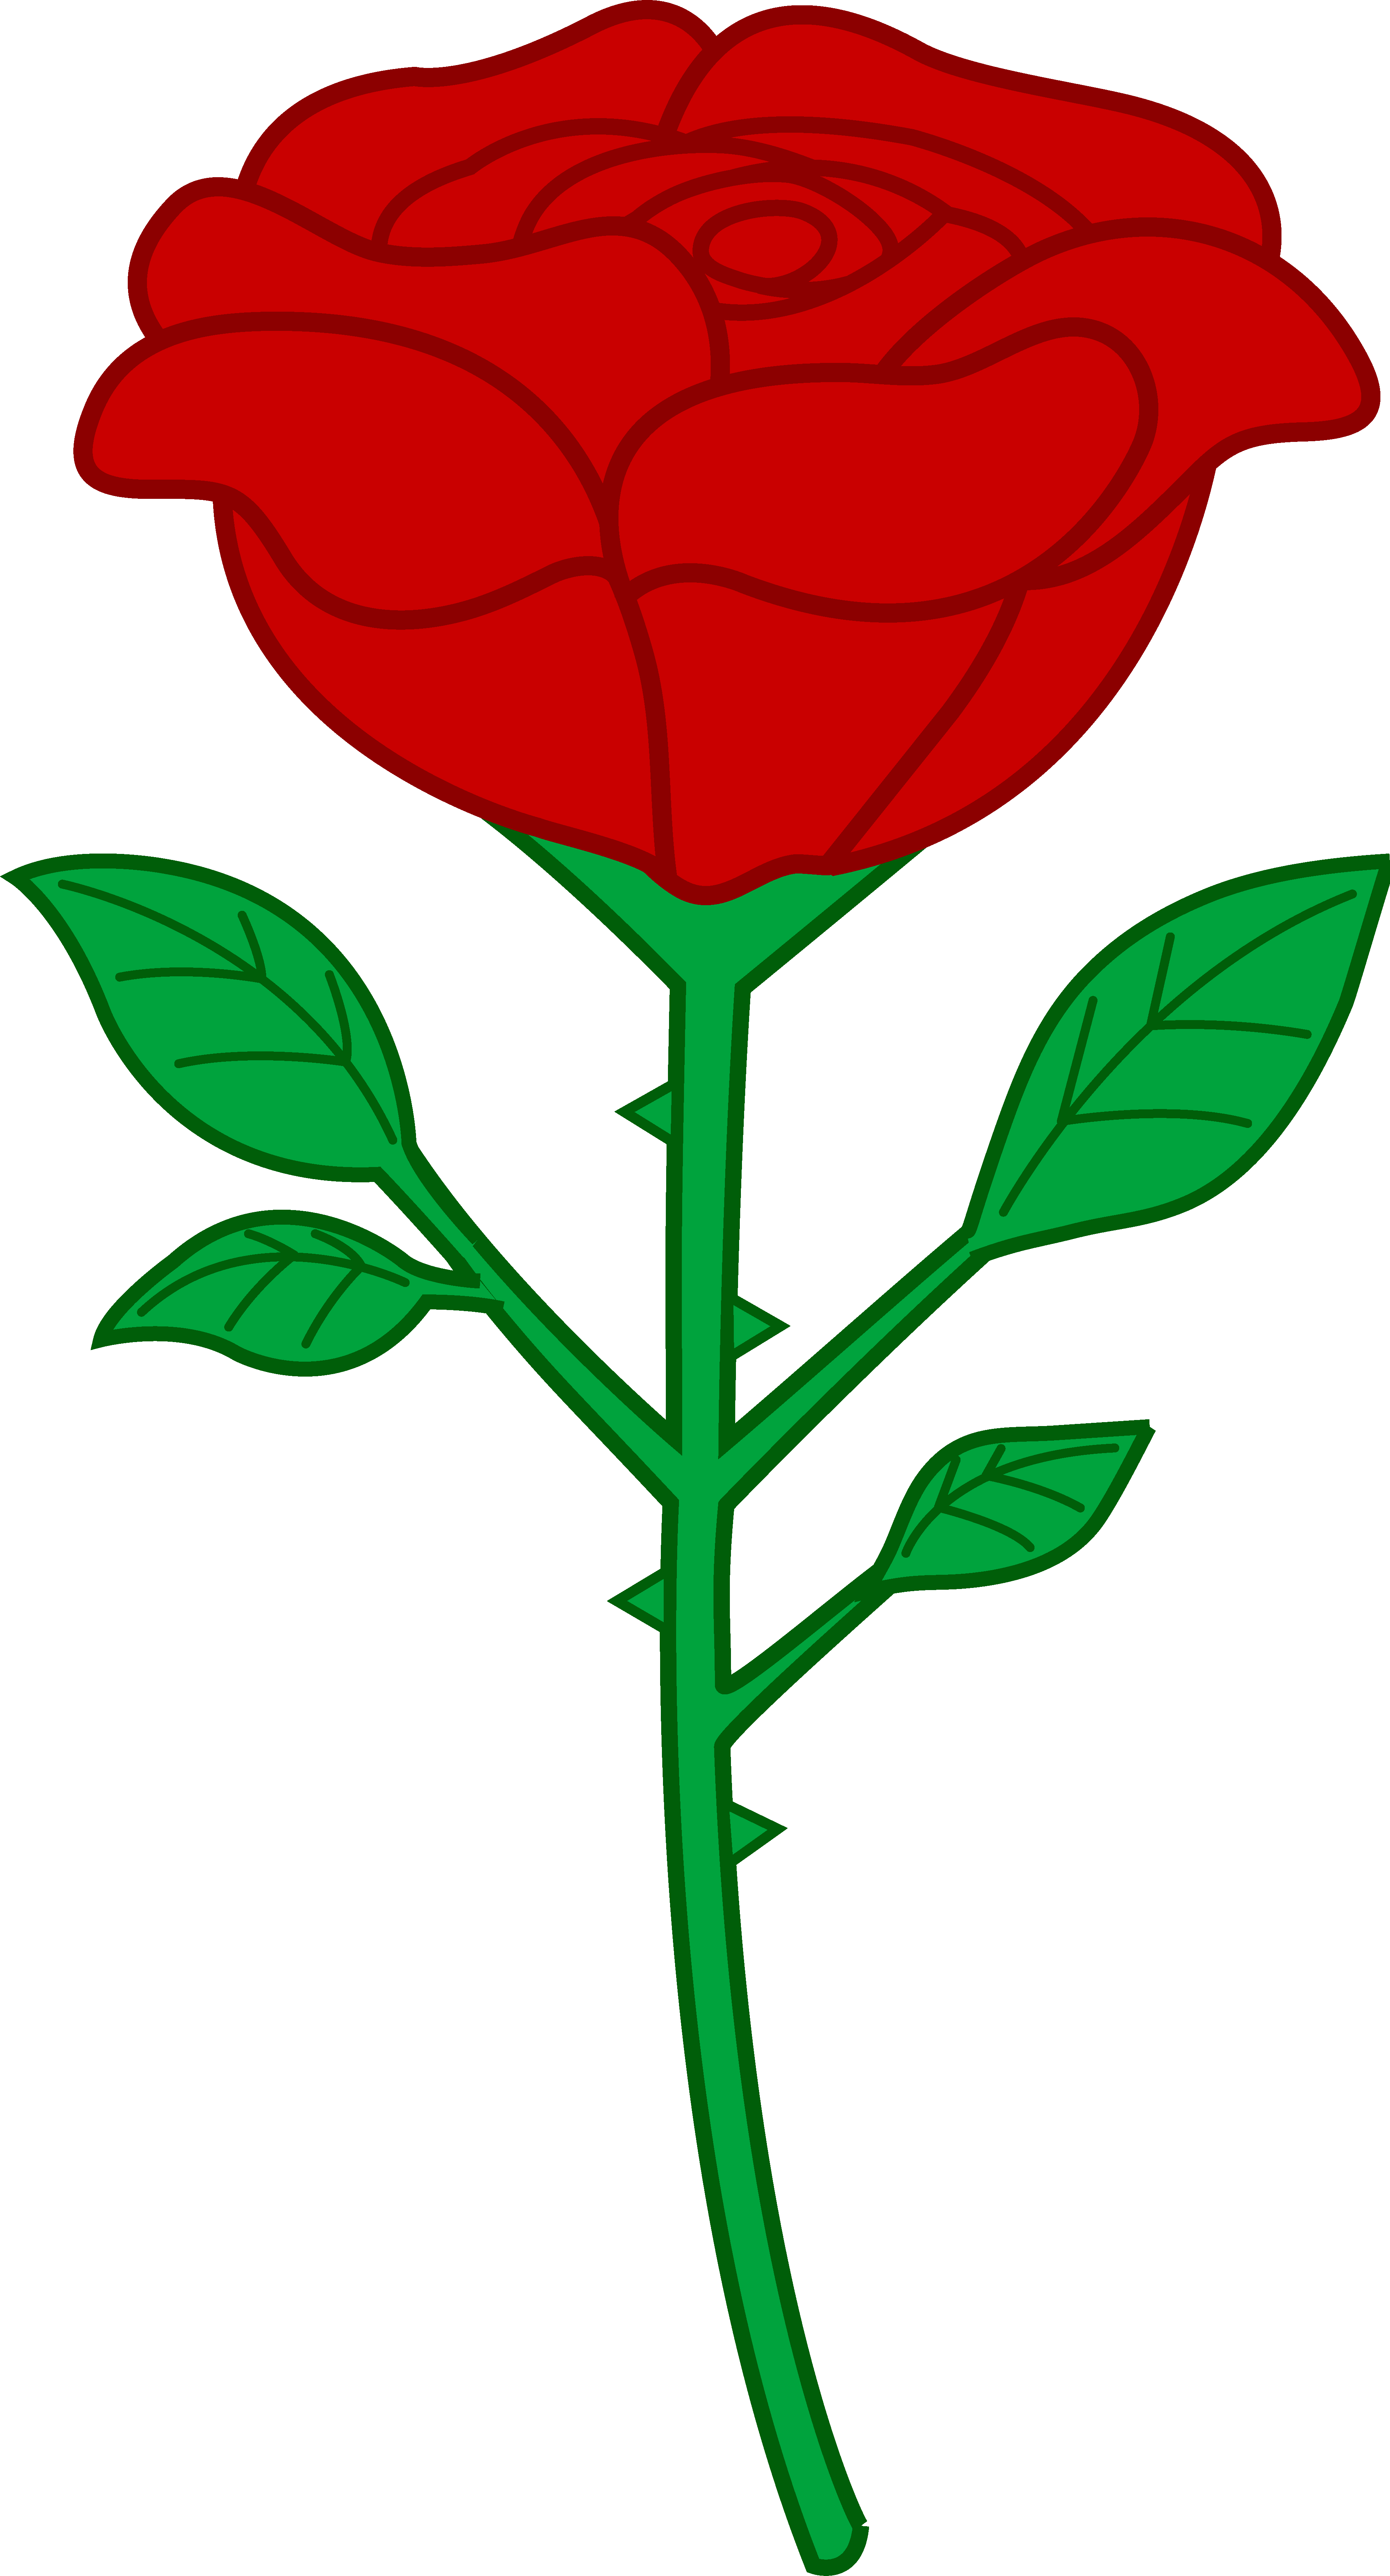 Rose Pictures Of Flowers Cartoon